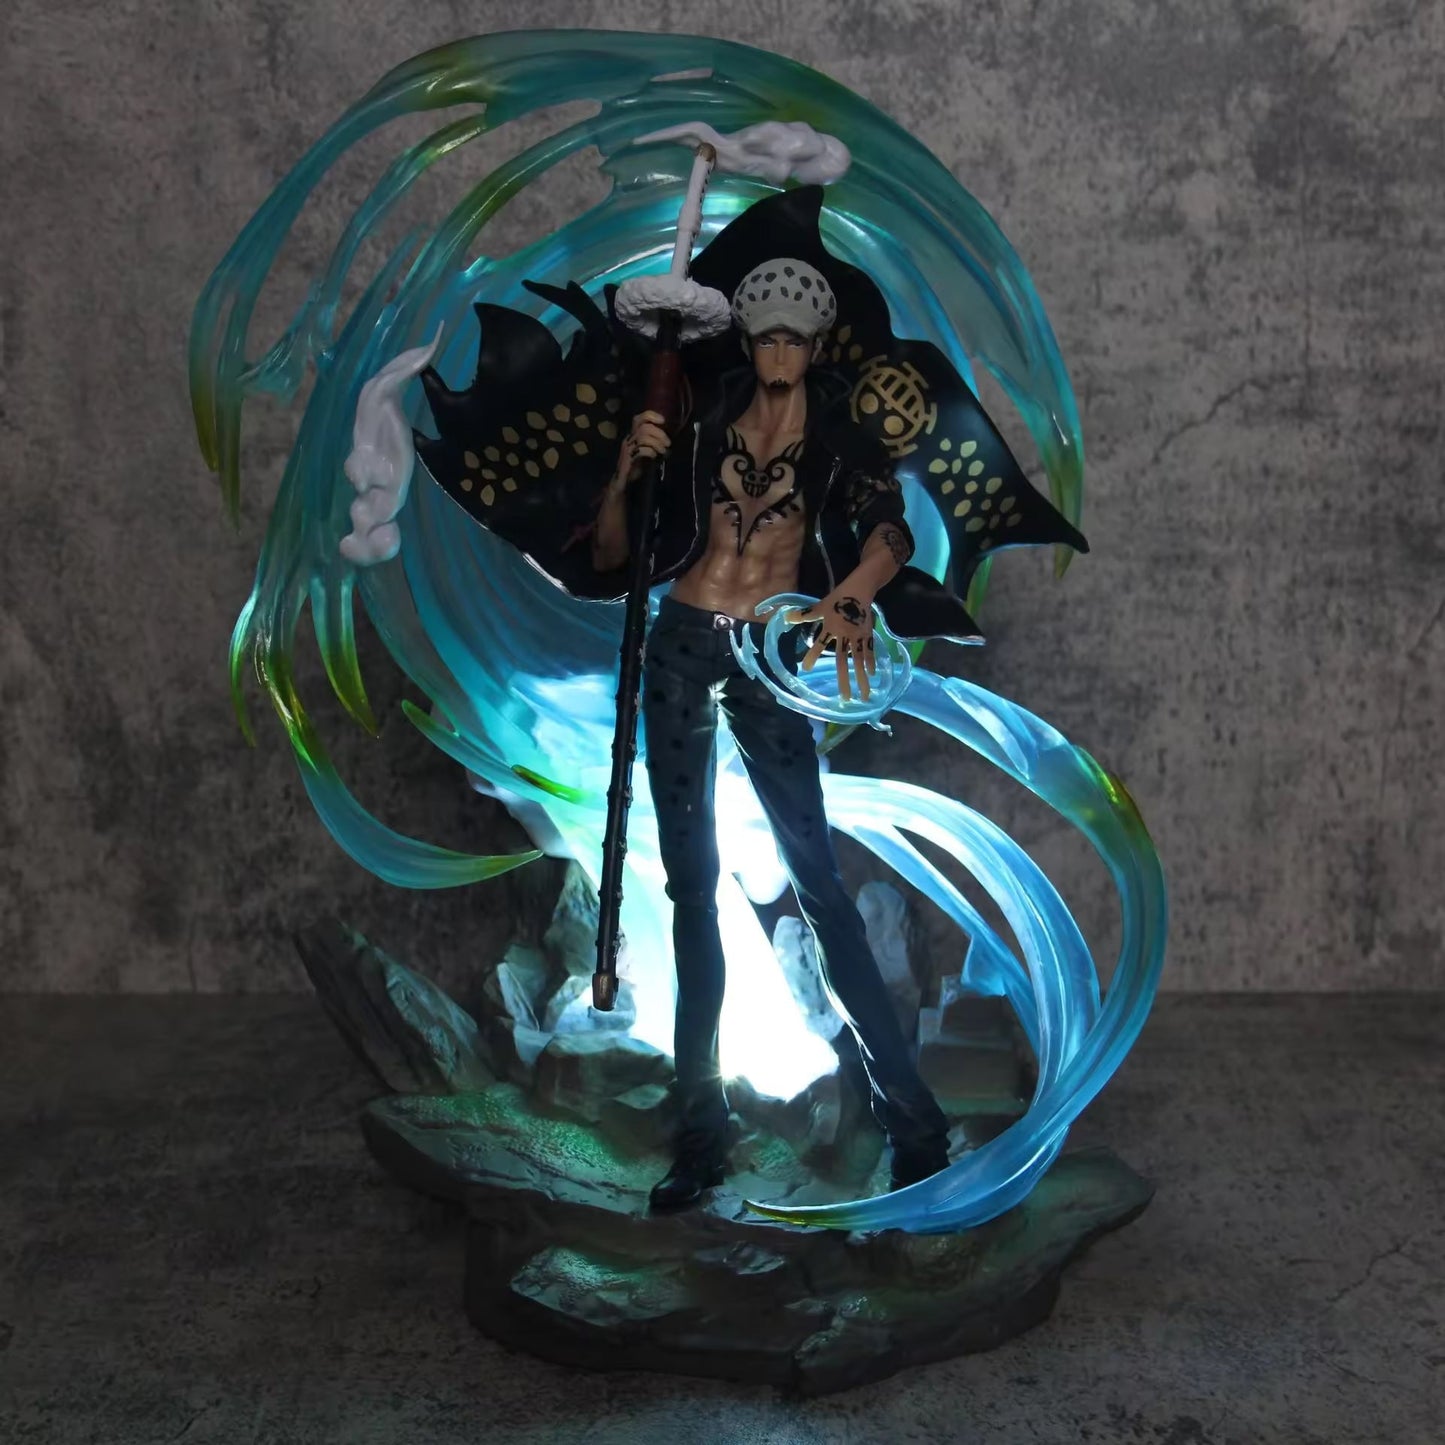 One Pieced anime PVC model toy GK Trafalgar D Water Law action figure with light